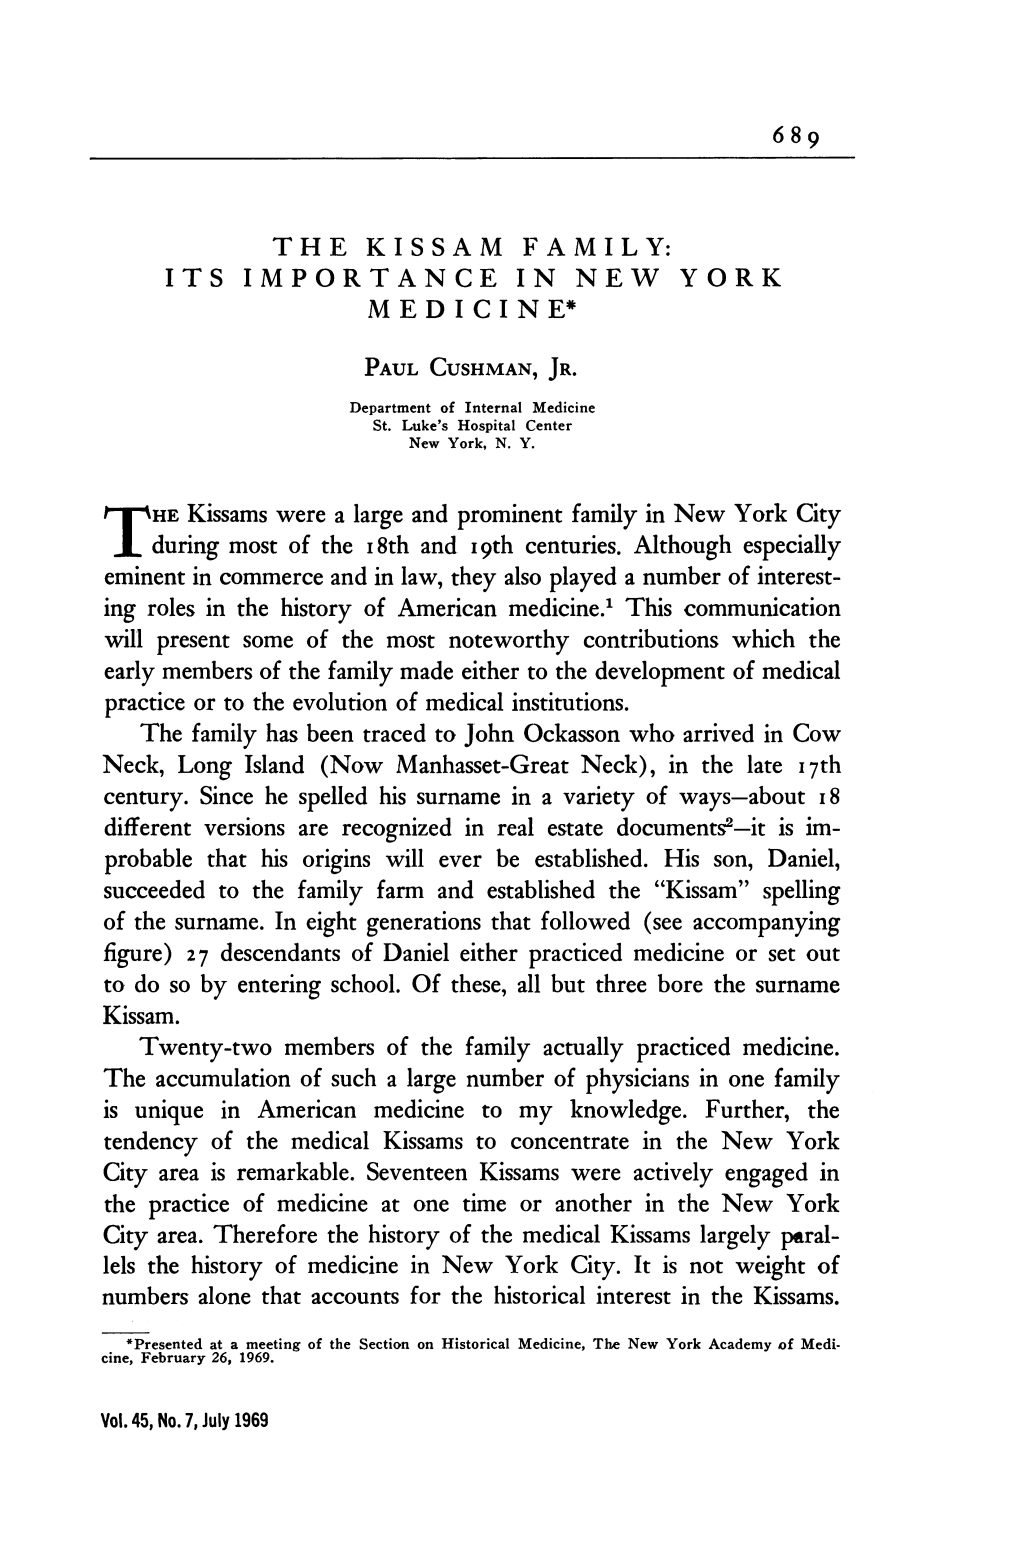 ITS IMPORTANCE in NEW YORK MED ICINE* PAUL CUSHMAN, JR. T HE Kissams Were a Large and Prominent Family In